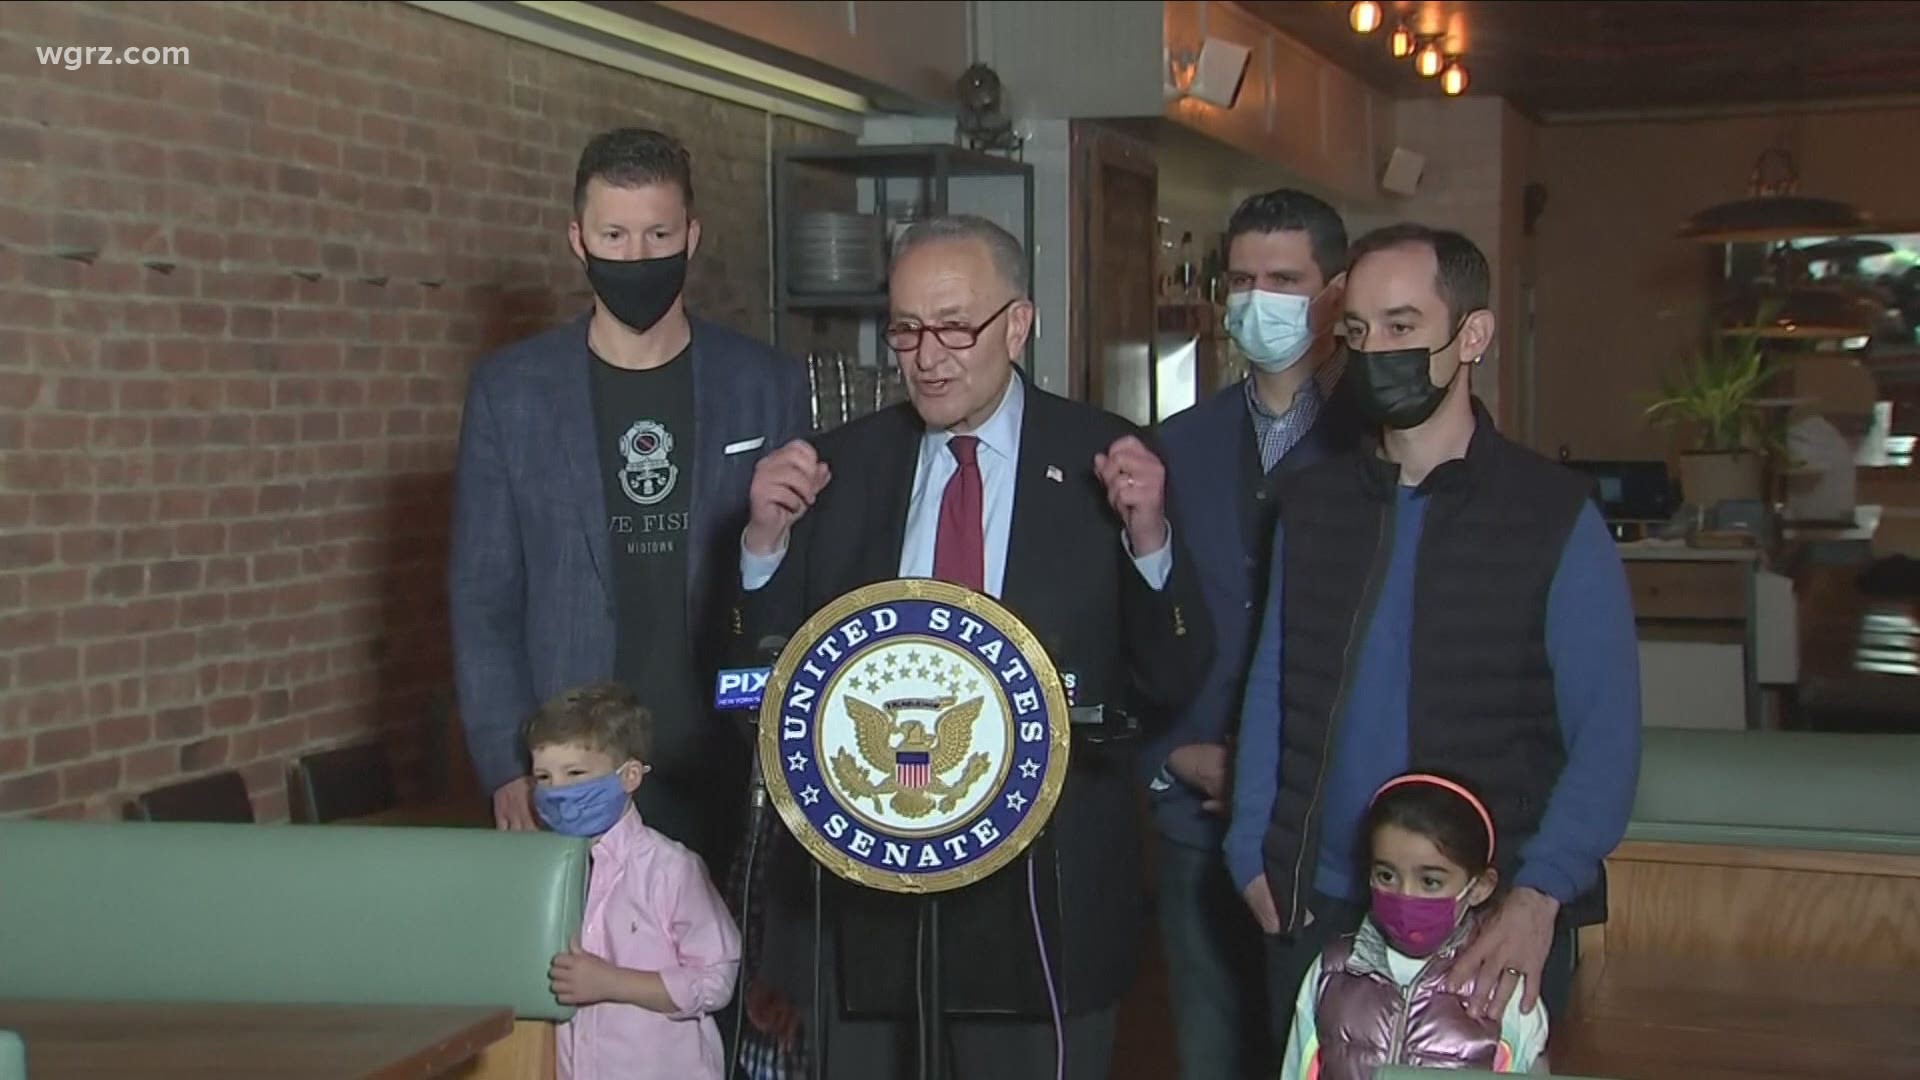 Senator Schumer urging New York State restaurant owners to apply for federal aid as part of the "Save Our Restaurants Act. "